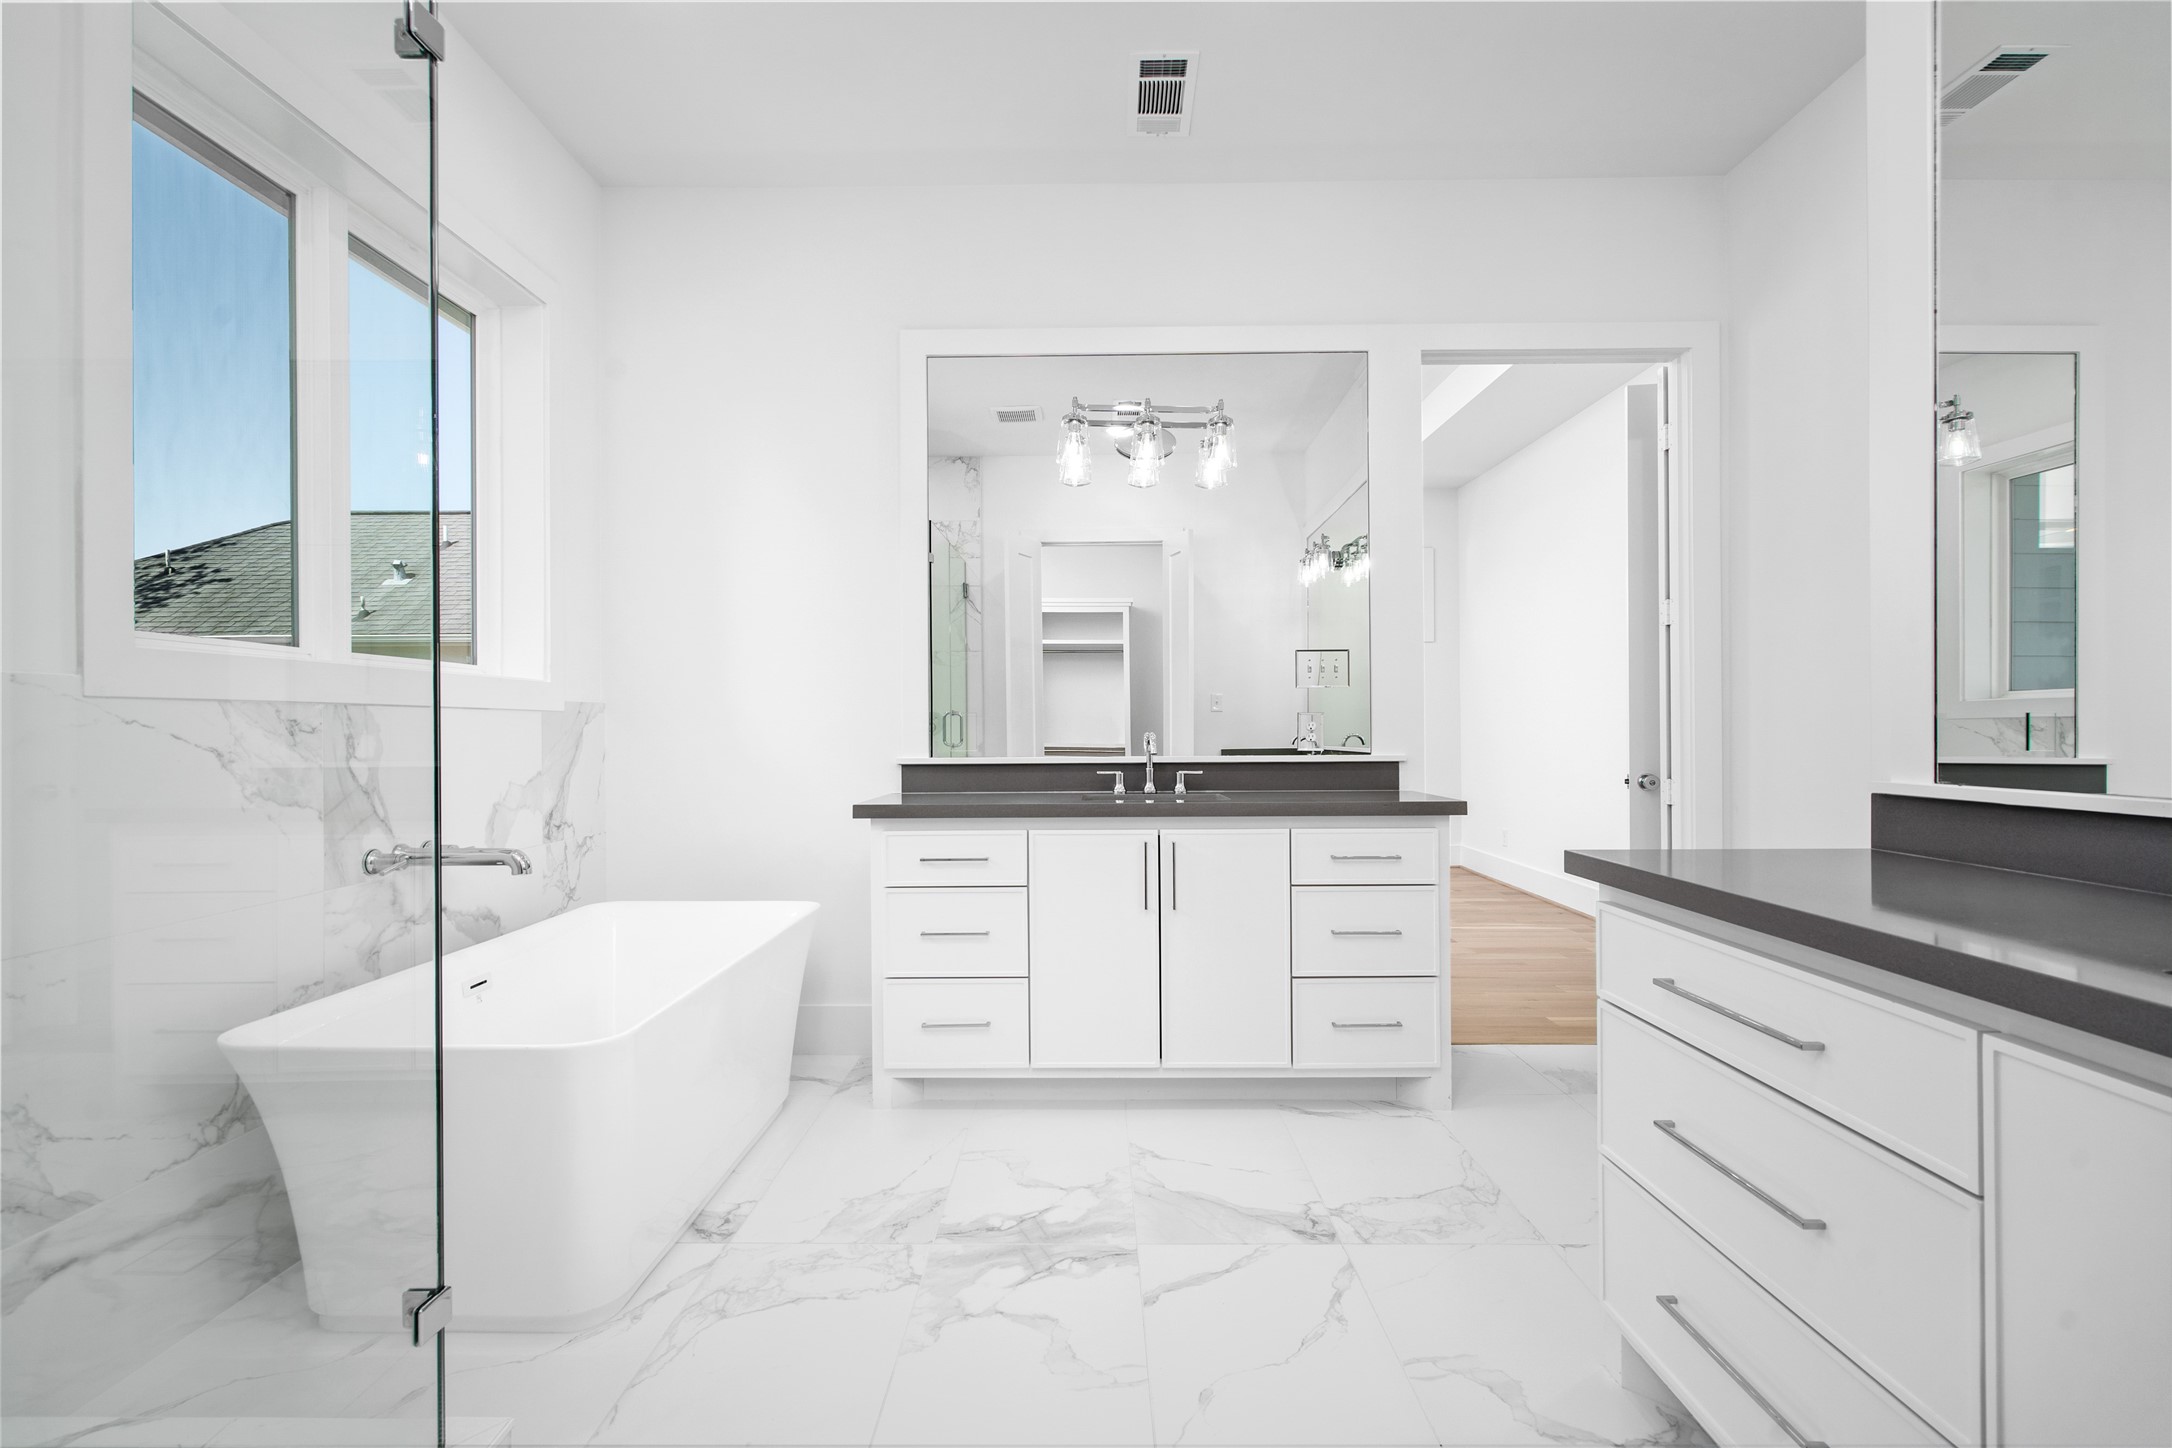 The primary bath features custom cabinetry, dual vanities, large soaking tub and stunning porcelain flooring.